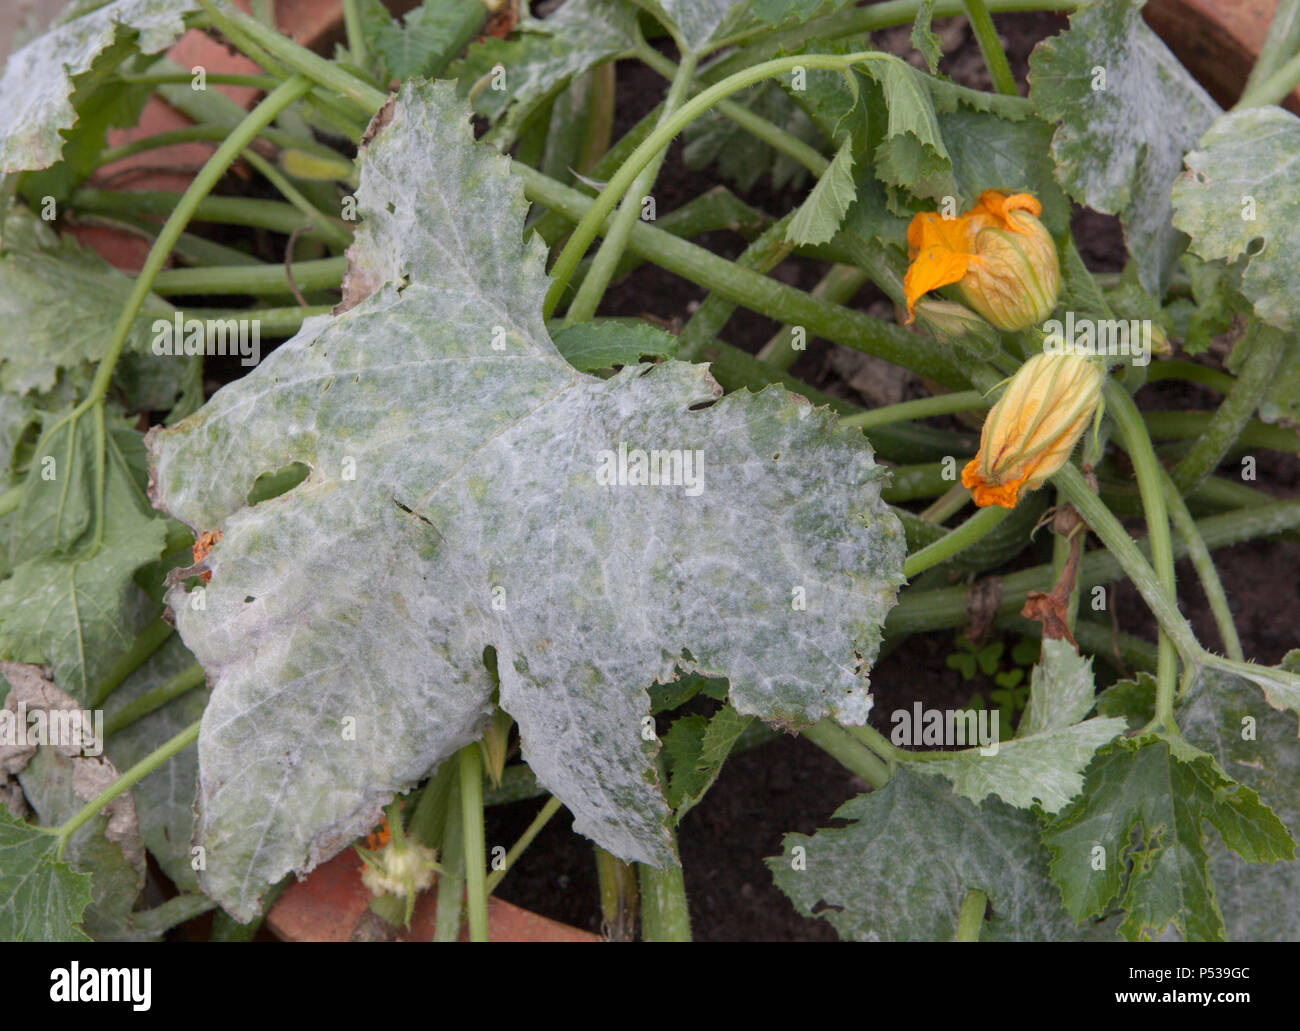 Powdery mildew on the leaves of a courgette plant Stock Photo